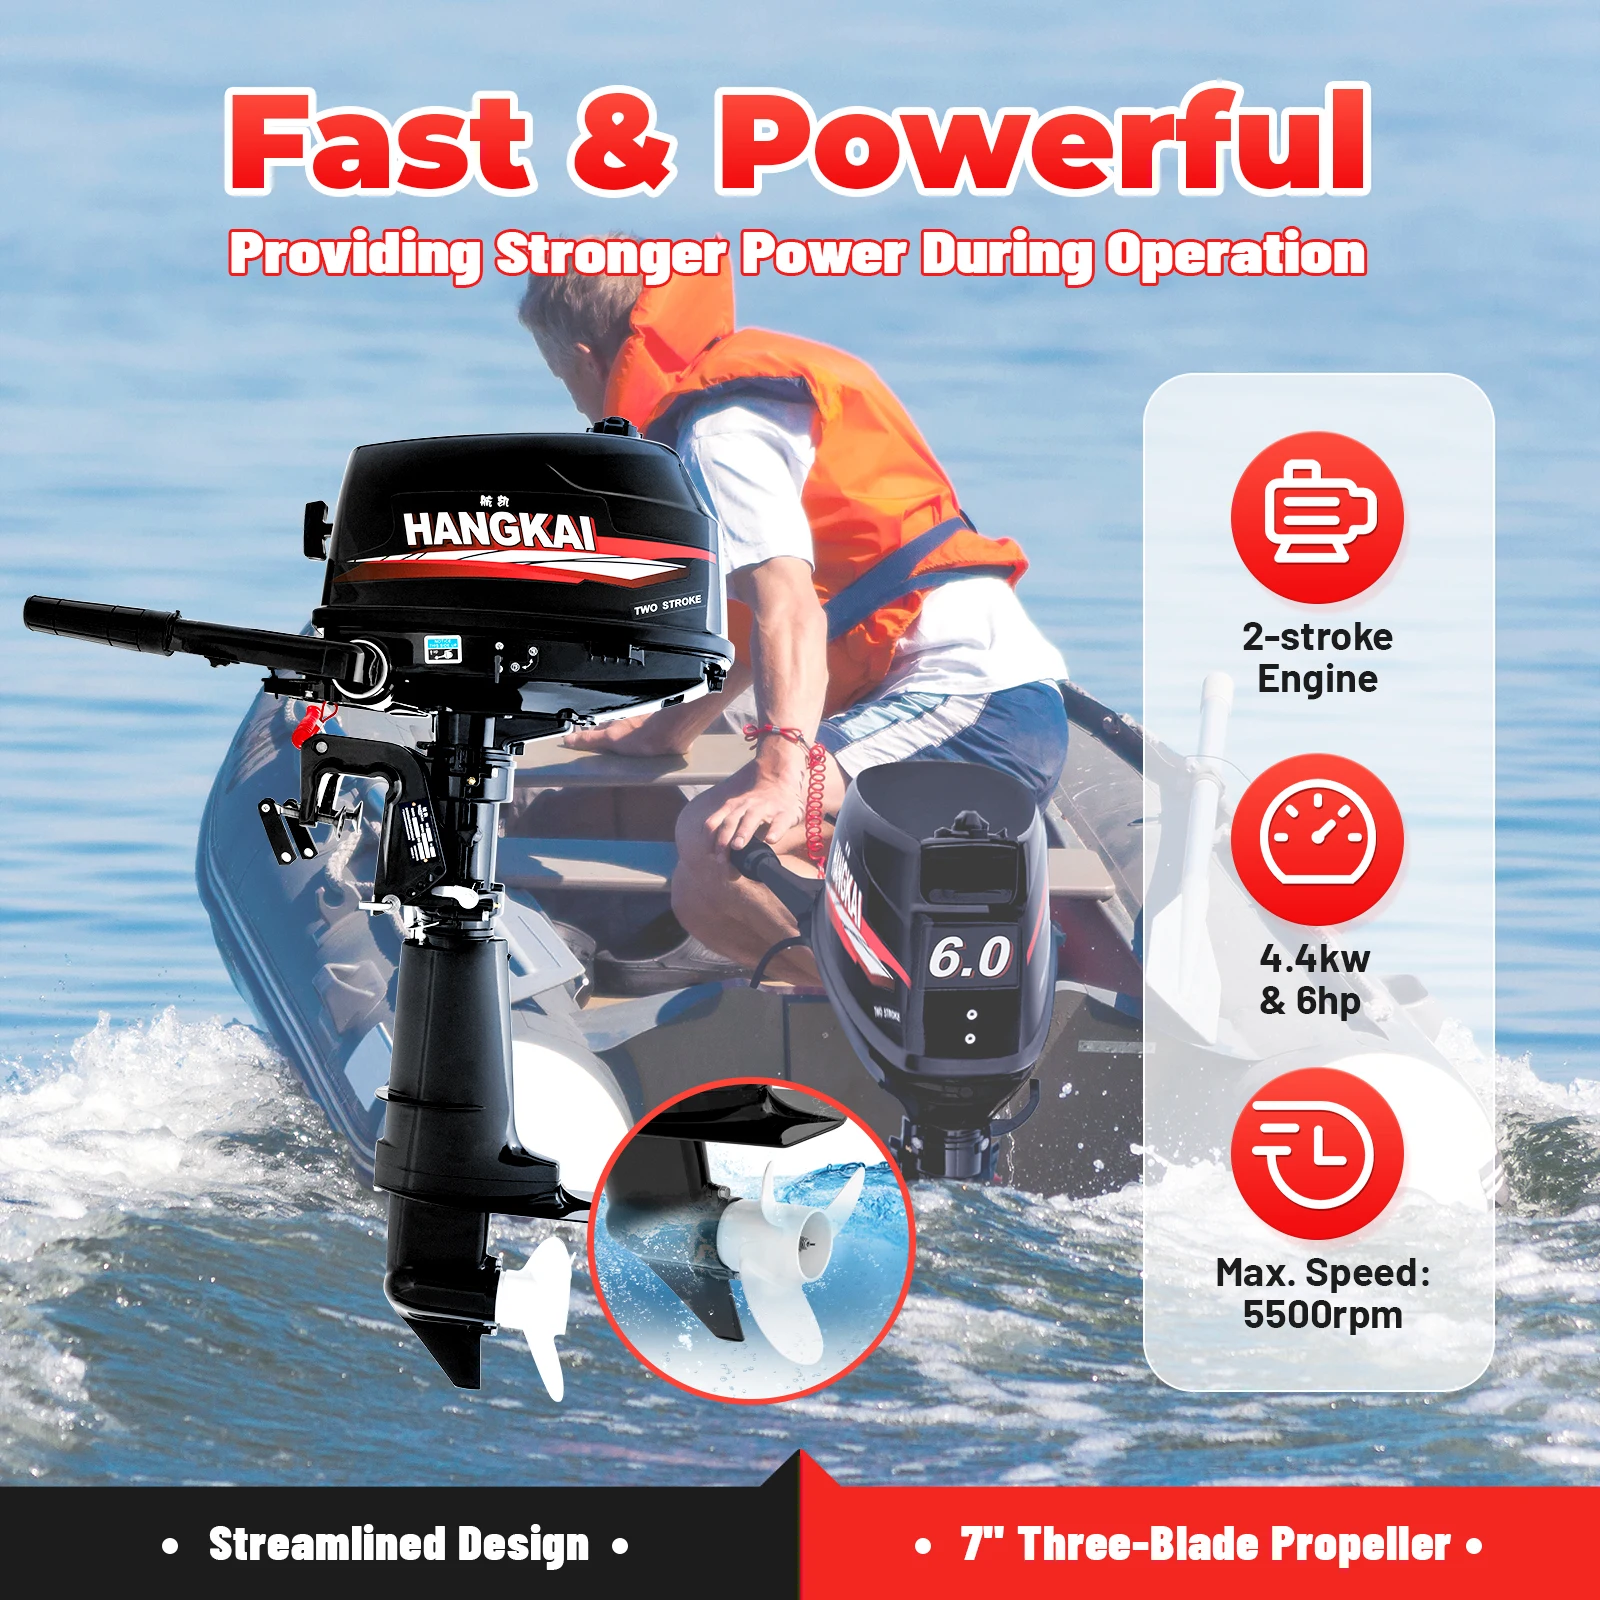 Hangkai 6HP Boat Outboard Motor Short Shaft, 2 Stroke Outboard Motor Fishing Boat Engine CDI Ignition ,Water Cooling System US 250cc motorcycle engine single cylinder 4 stroke style water cooled engine electric method origin ignition cdi start